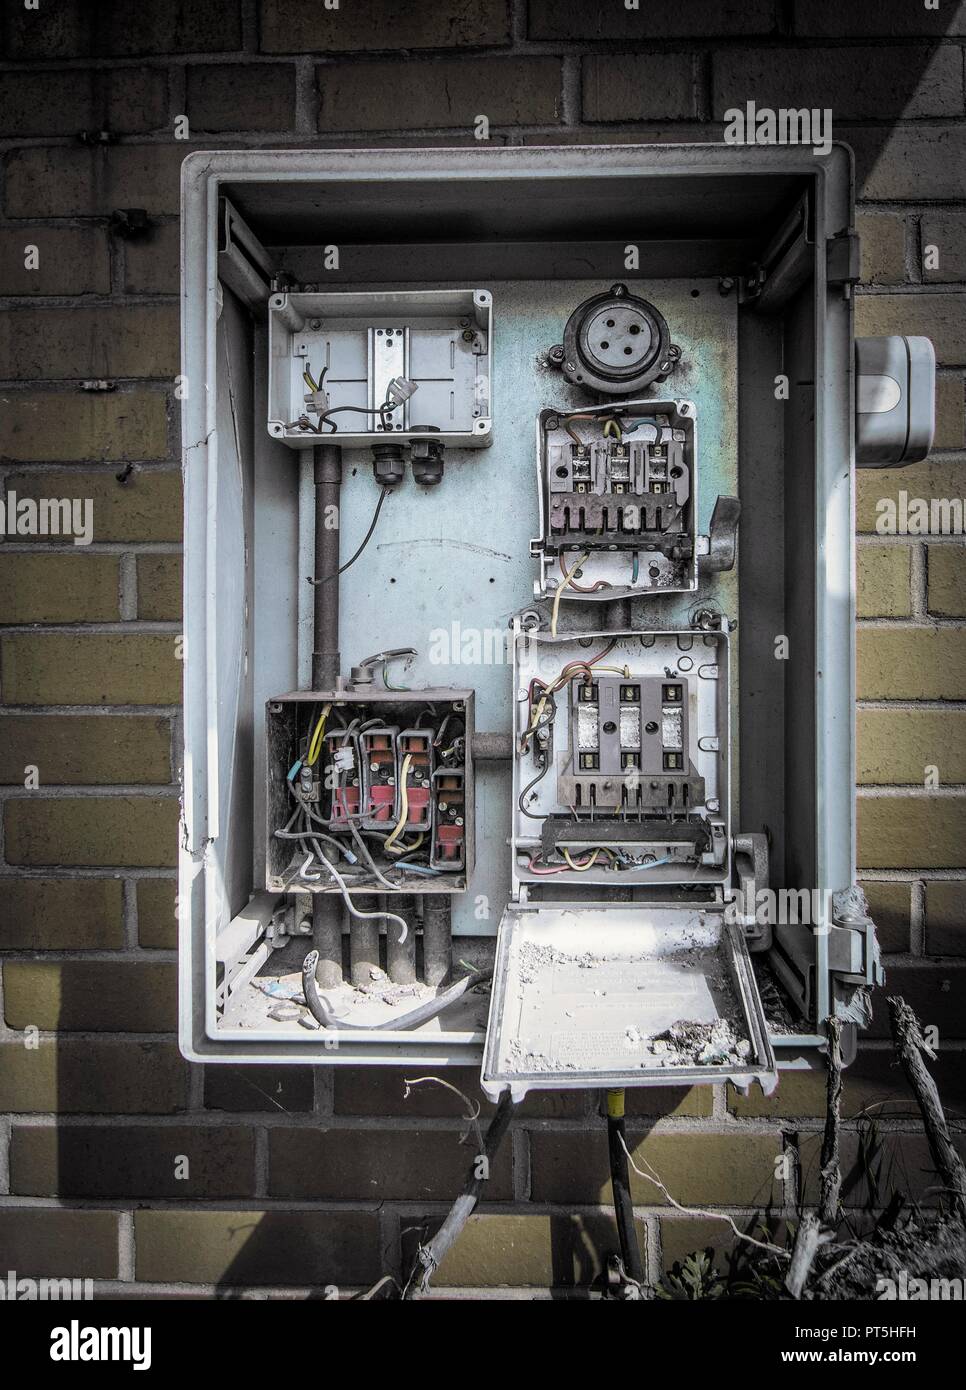 Disused fuse box on wall of abandoned industrial building. Stock Photo